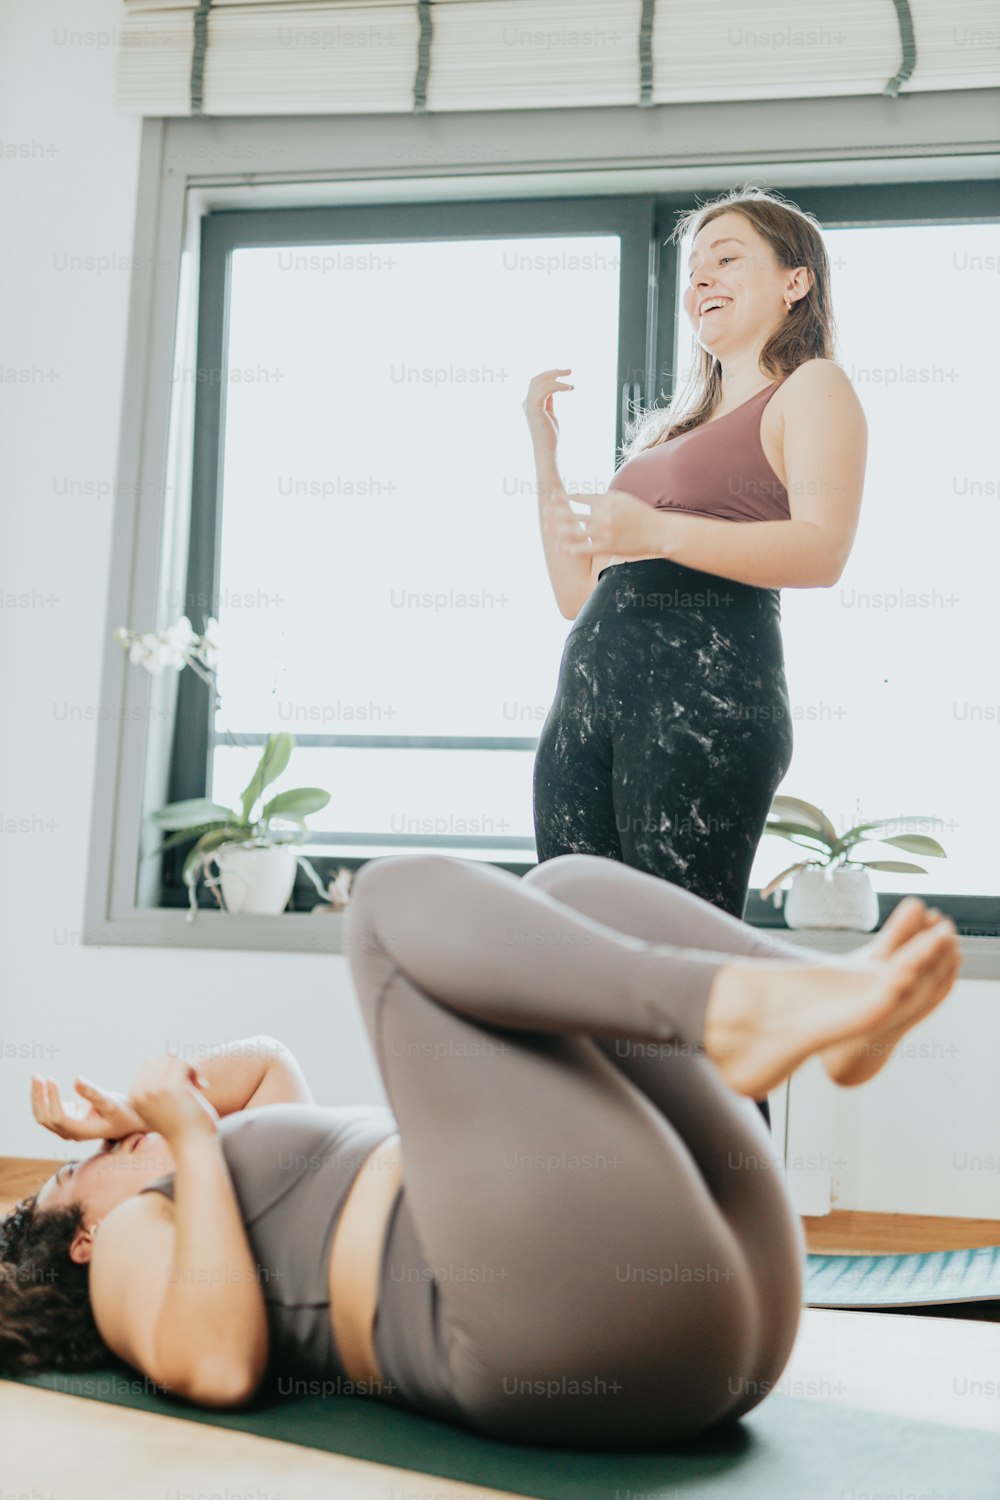 a woman in a yoga pose with another woman in the background